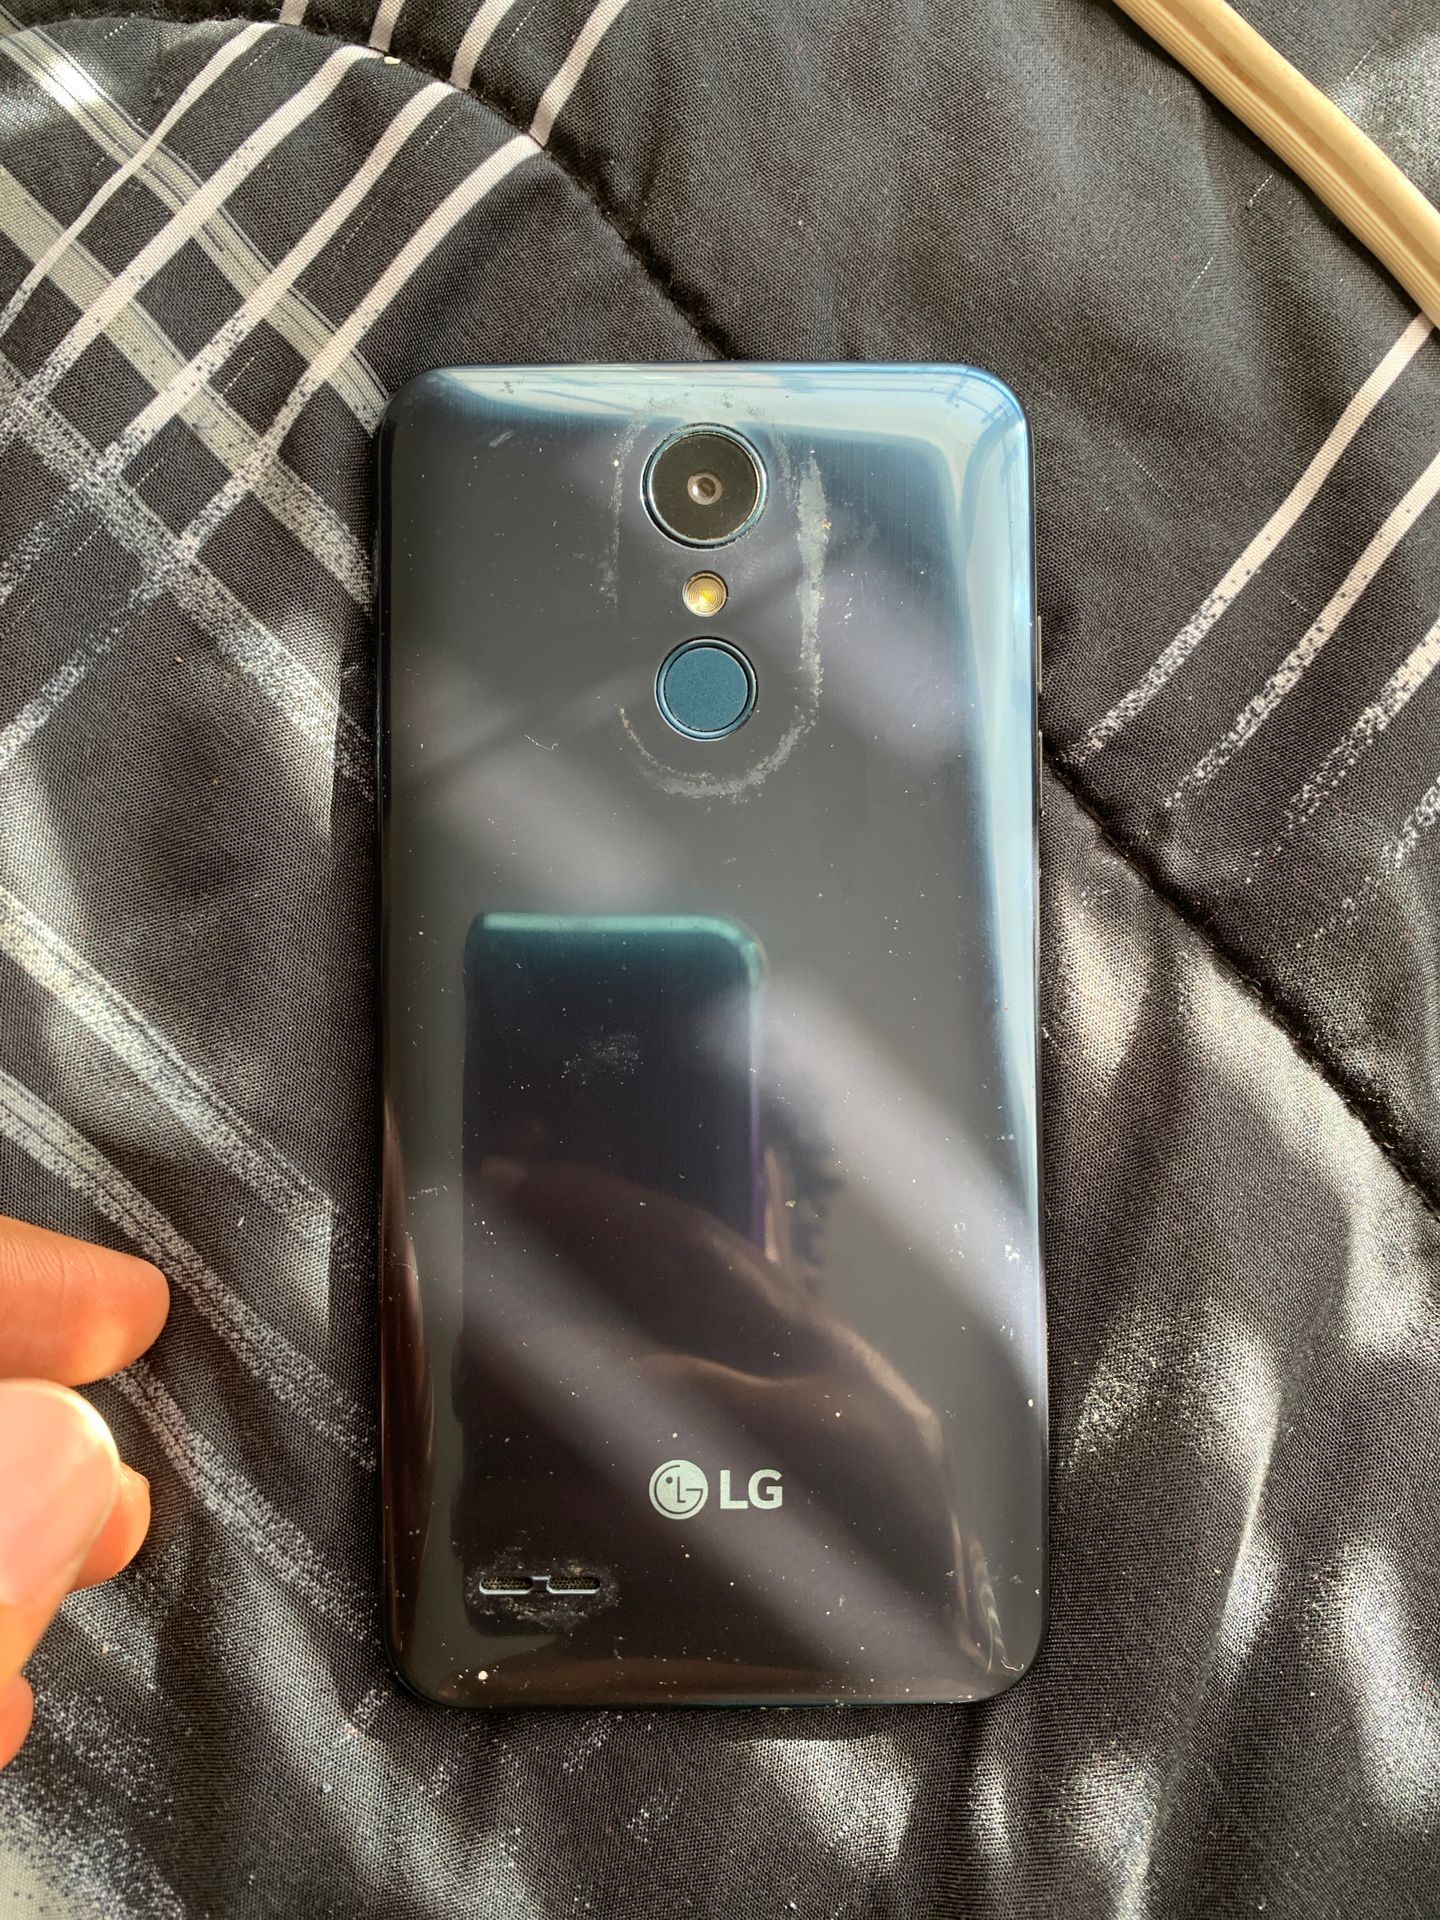 Android LG For Sale Lowest Price $40 Unlock